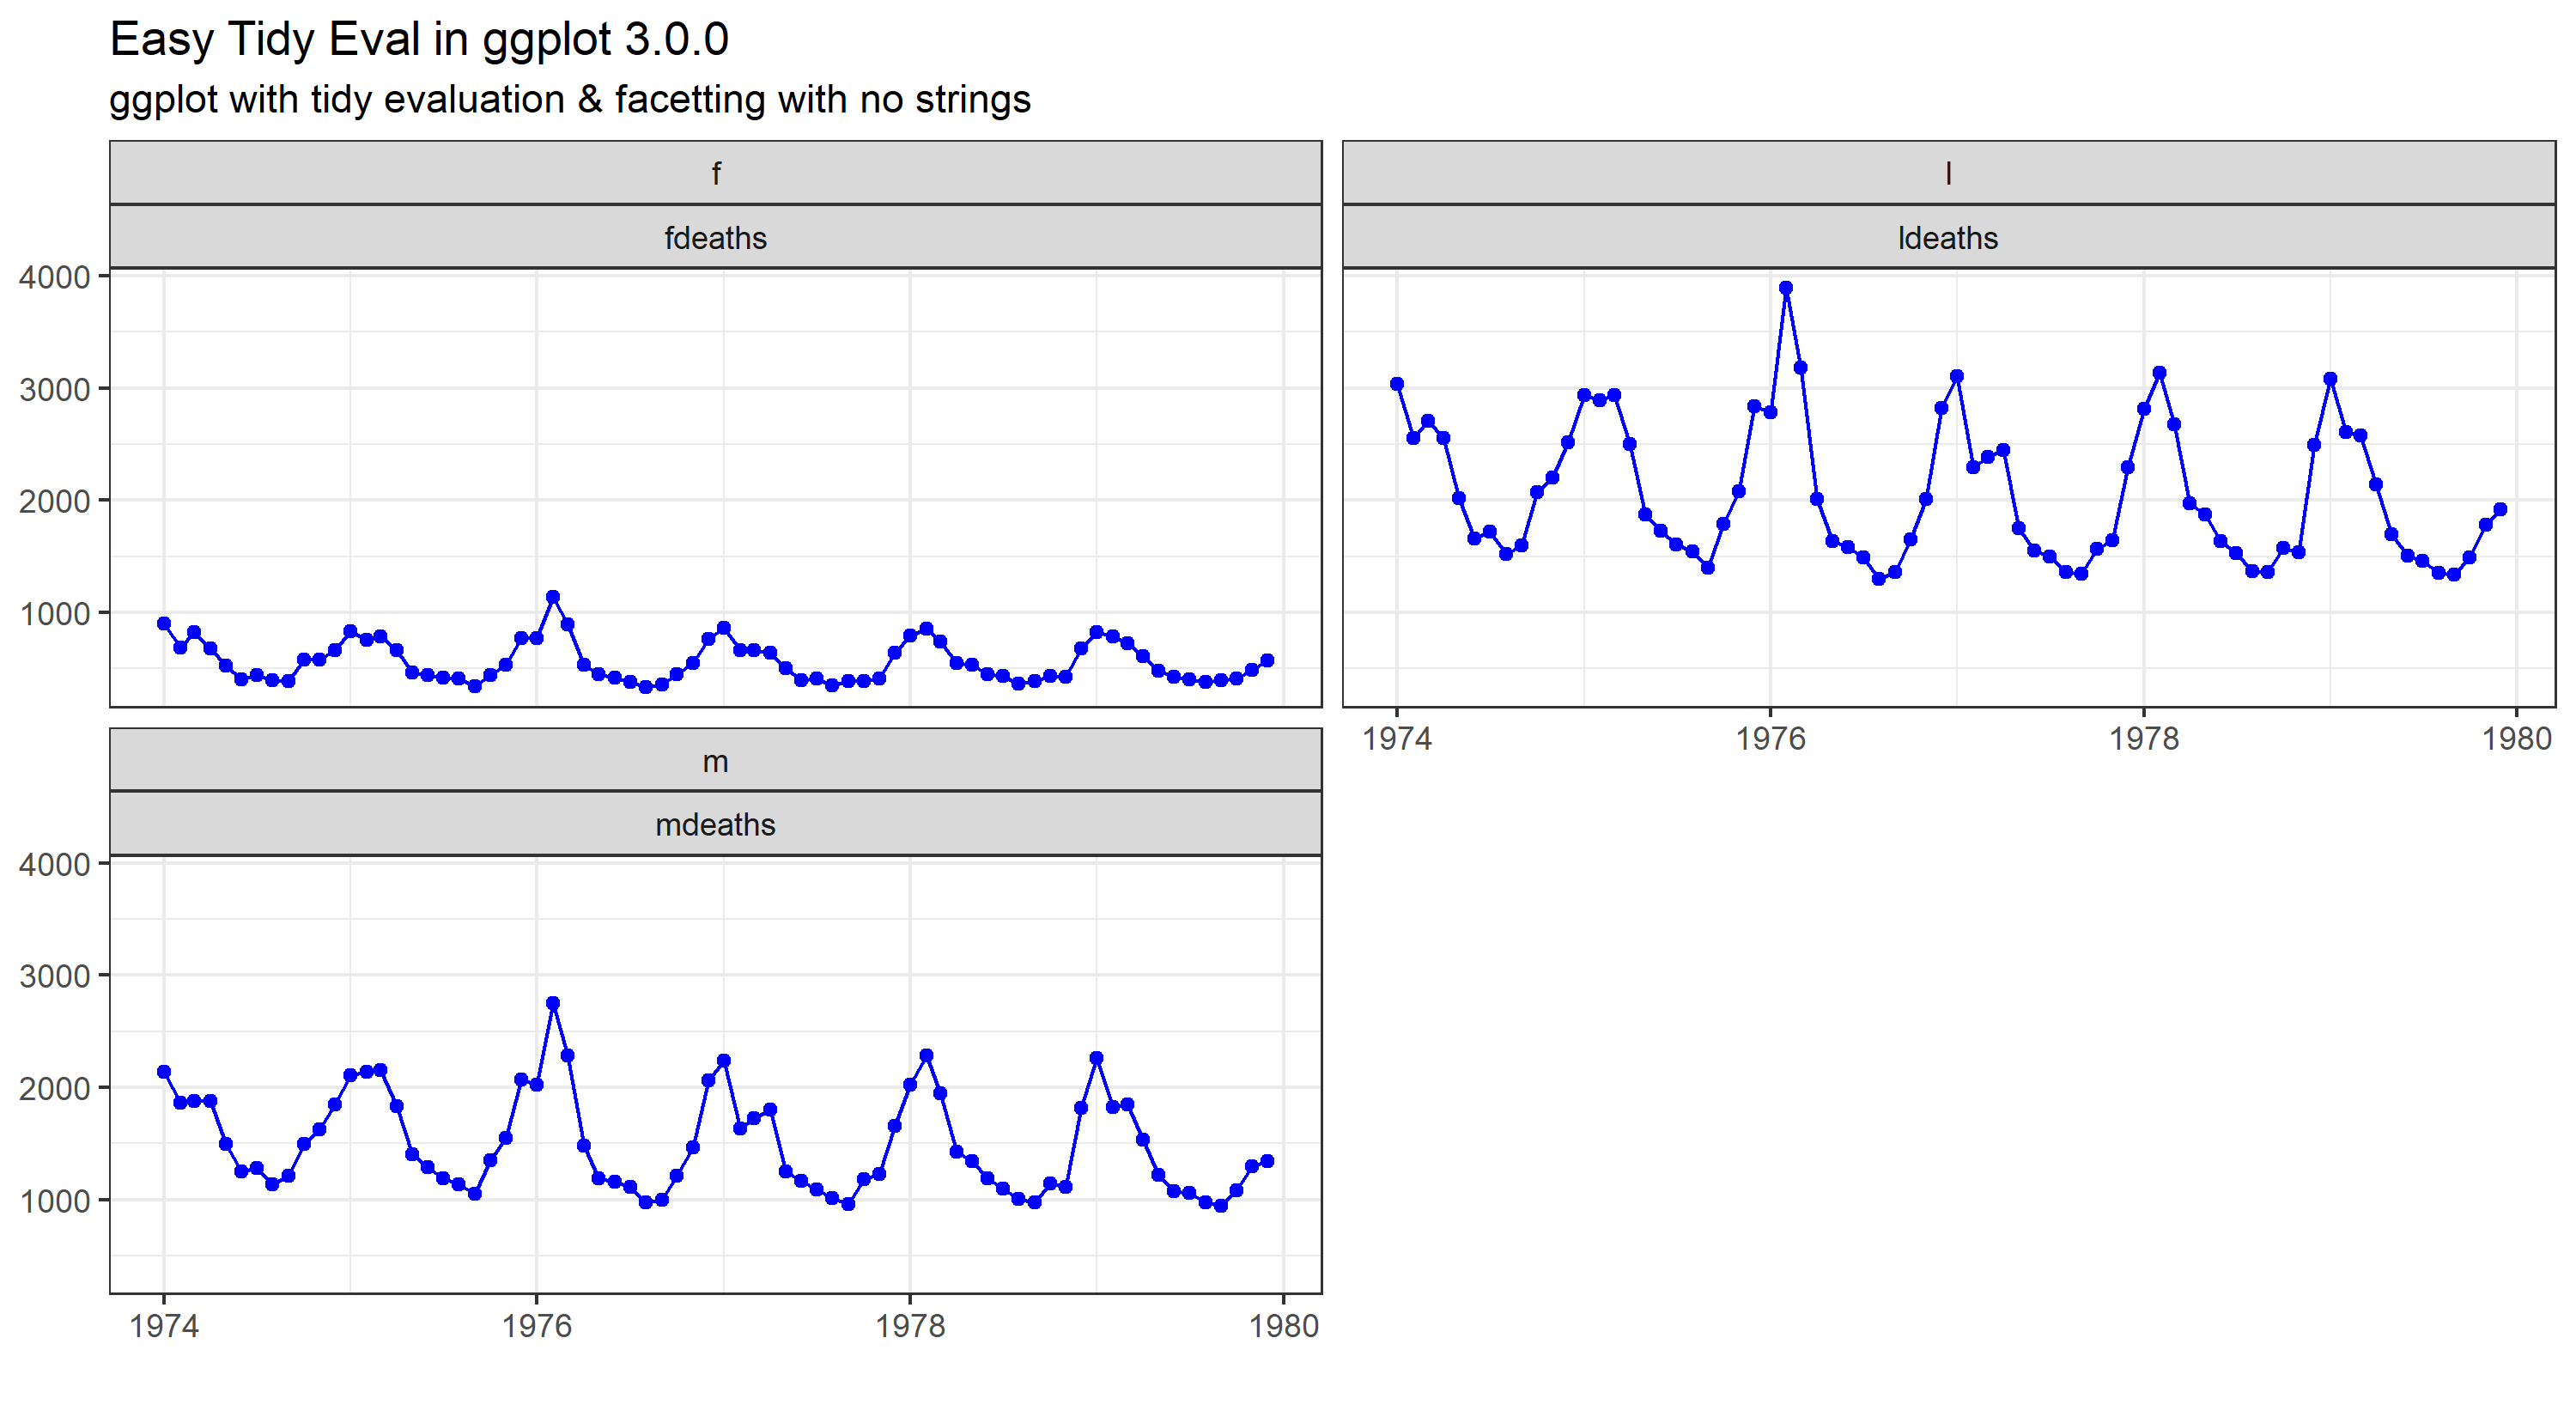 More tidy evaluation with ggplot2